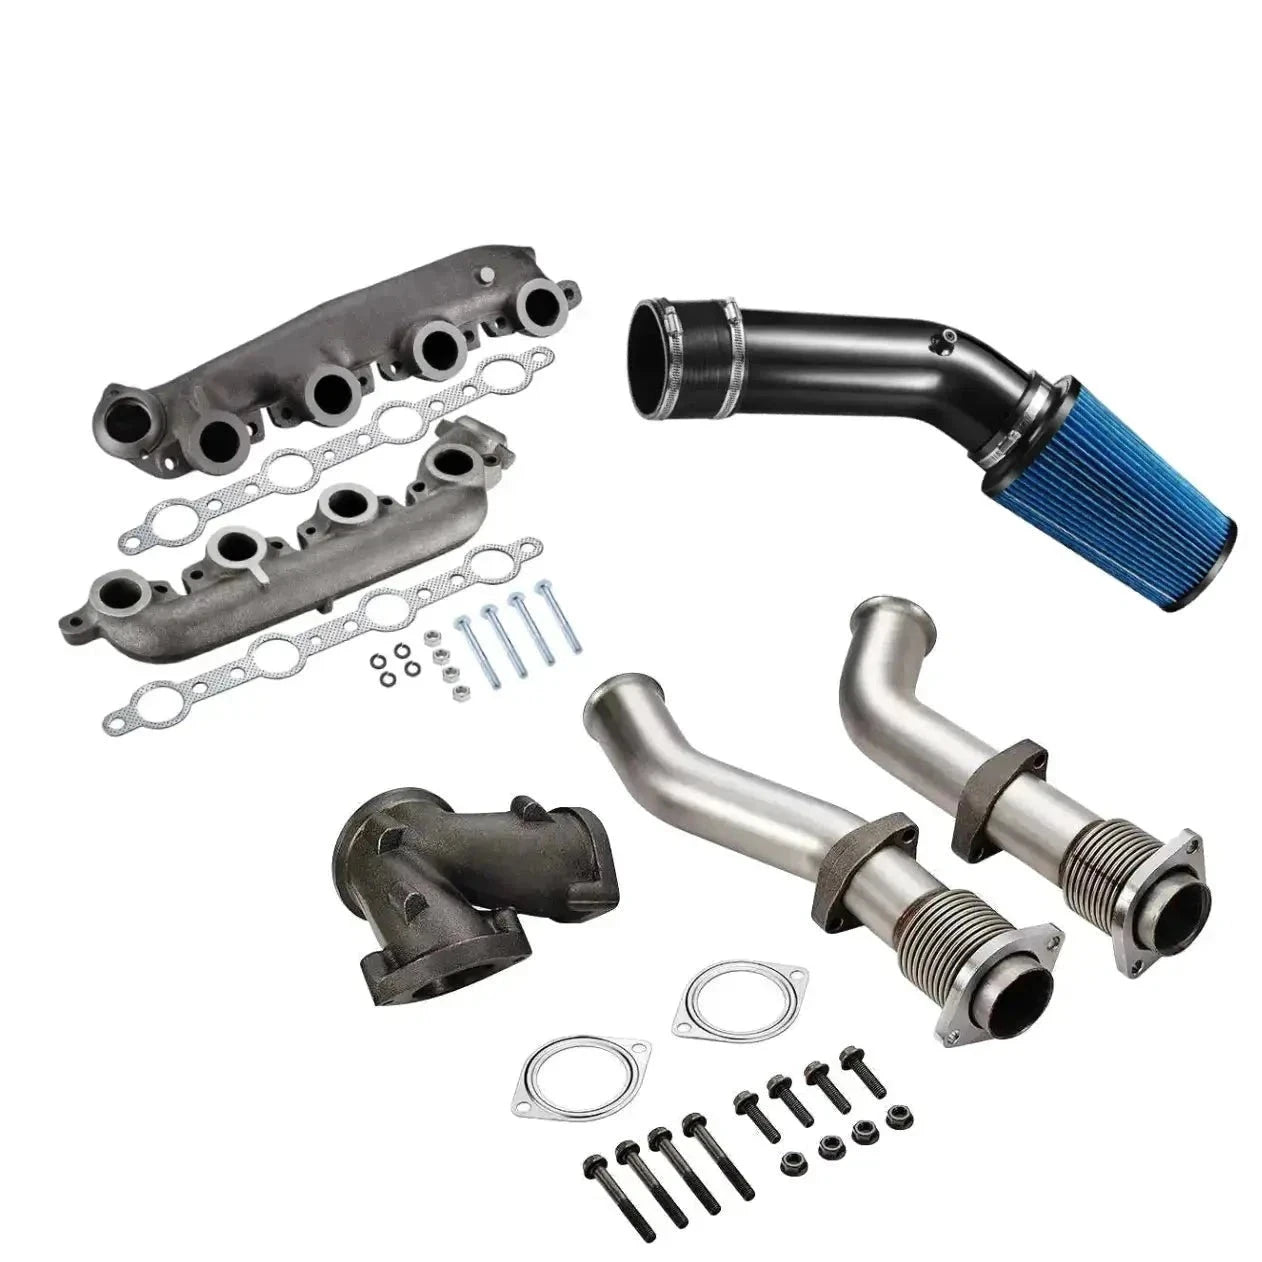 Exhaust Manifold/Up-Pipe Exhaust/Cold Air Intake Kit for 1999.5-2003 Ford 7.3 Powerstroke Diese Flashark